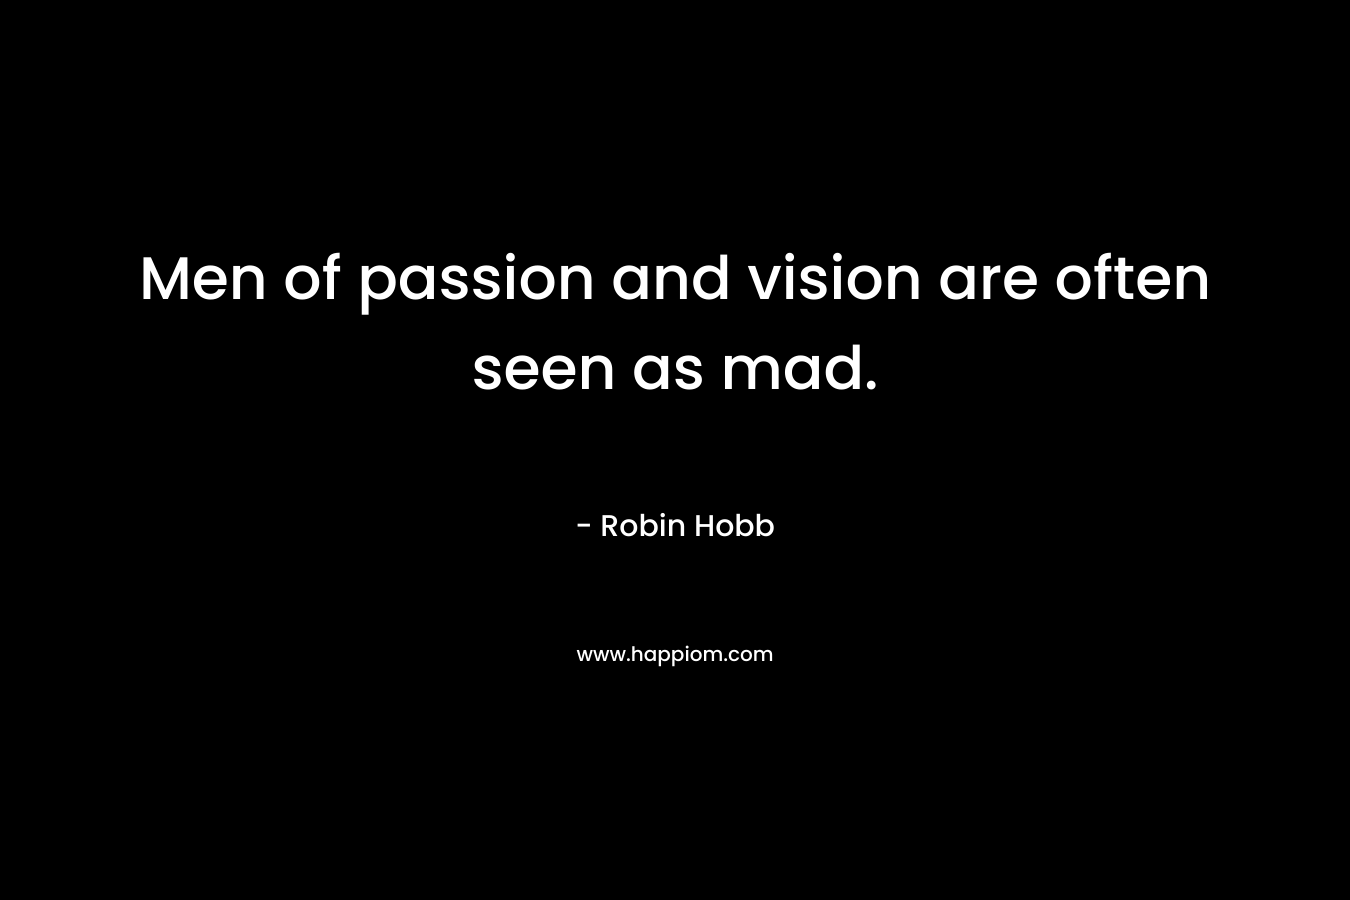 Men of passion and vision are often seen as mad.